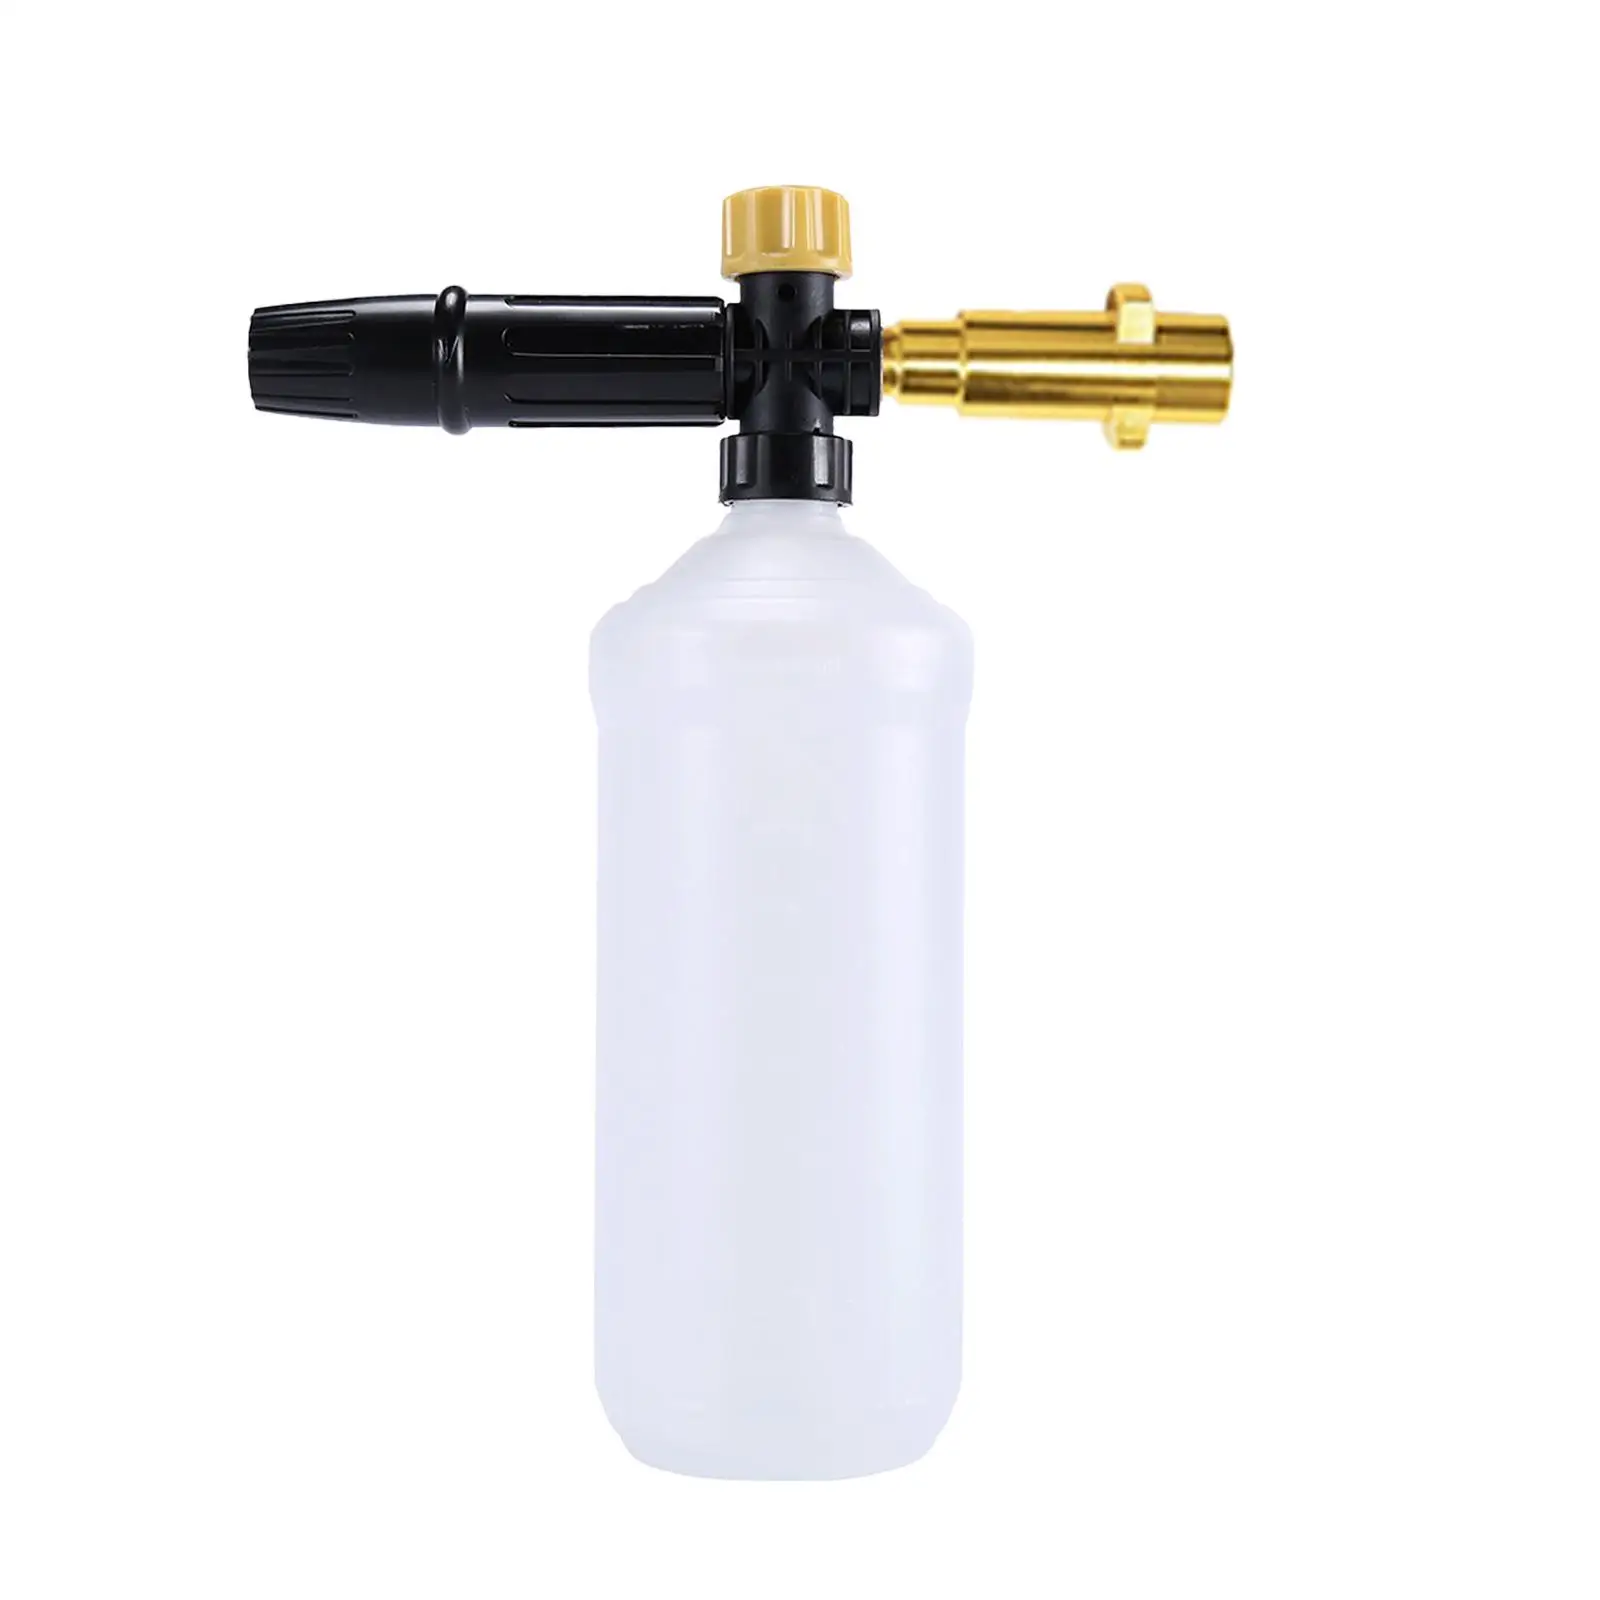 Foaming Pump Sprayer 1000ml Spraying Kettle for Car Wash Home Cleaning